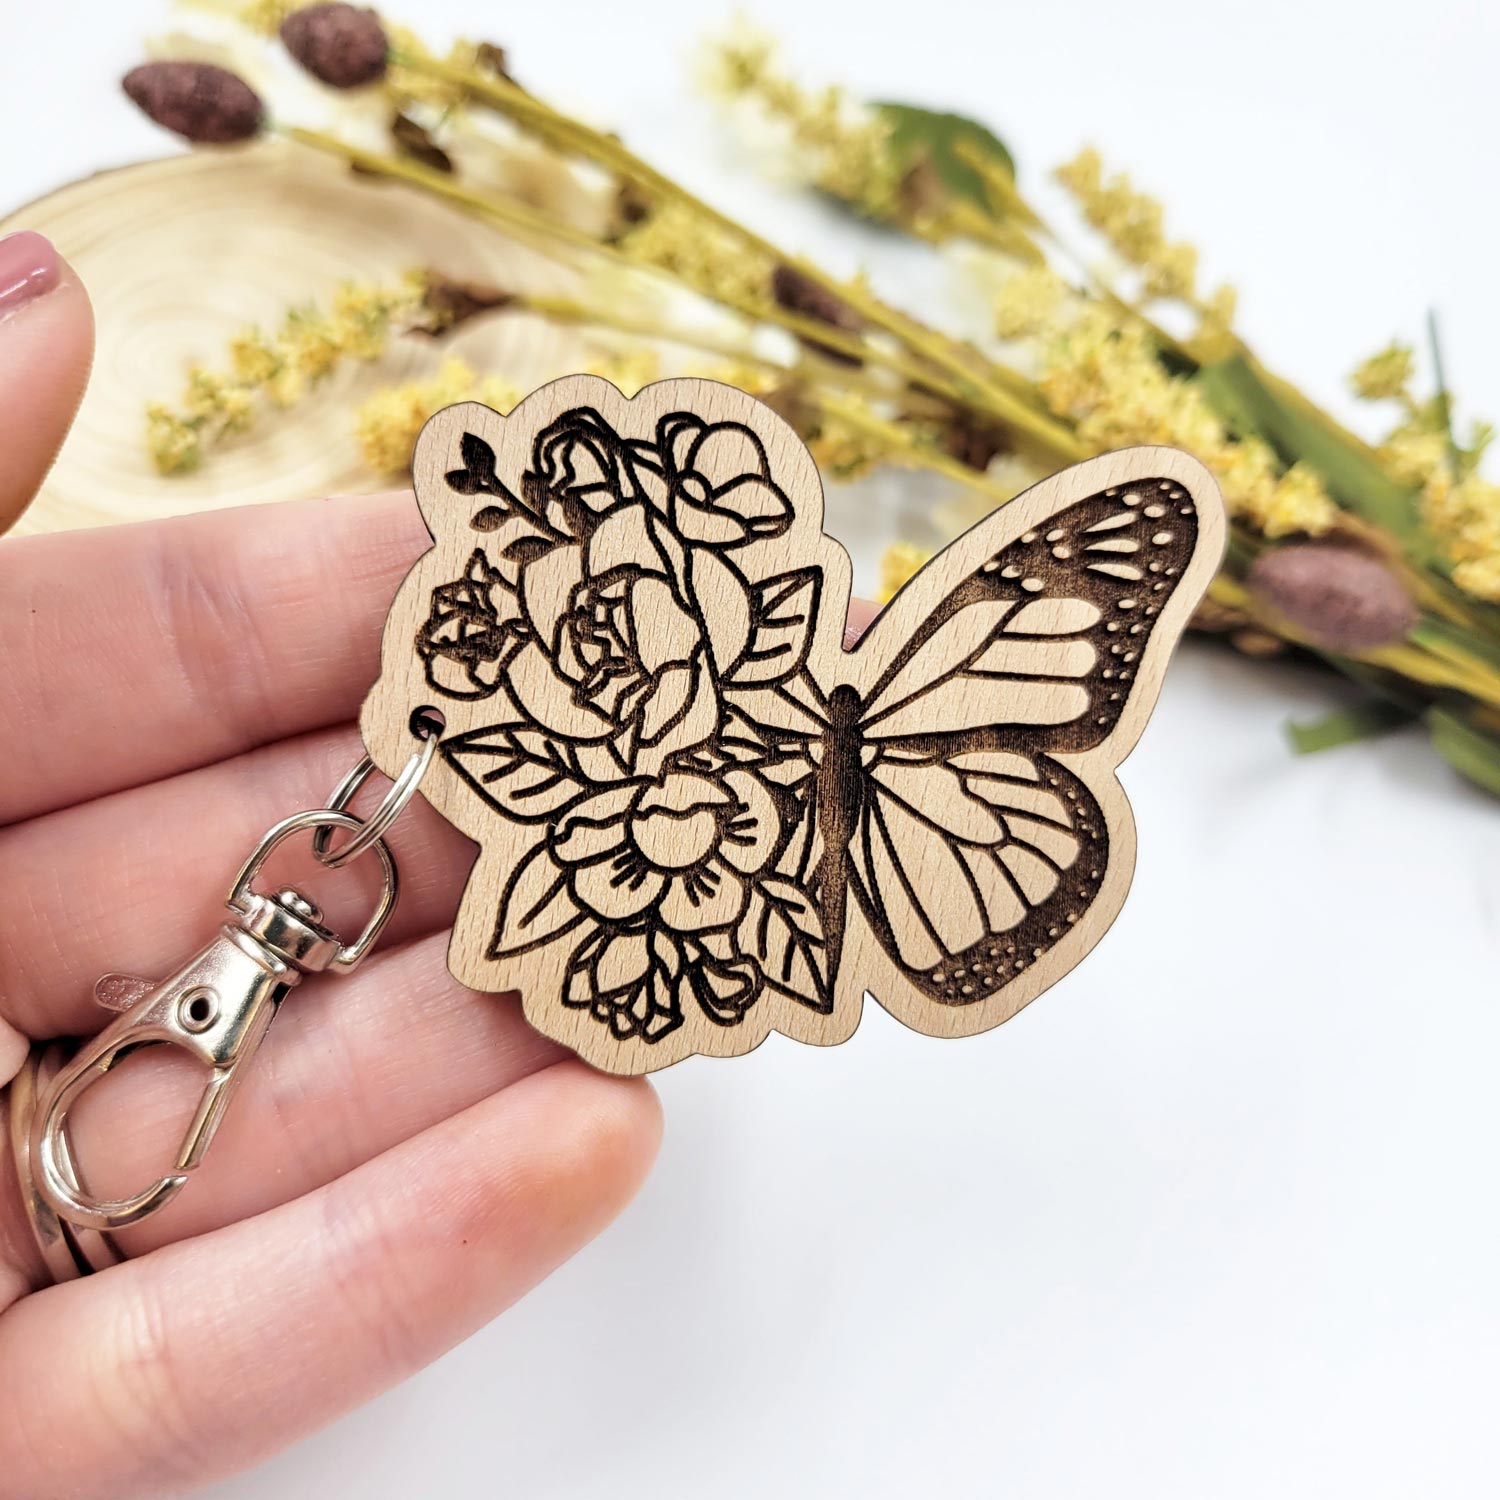 Floral Be Kind Keychain for Glowforge or Laser Cutter